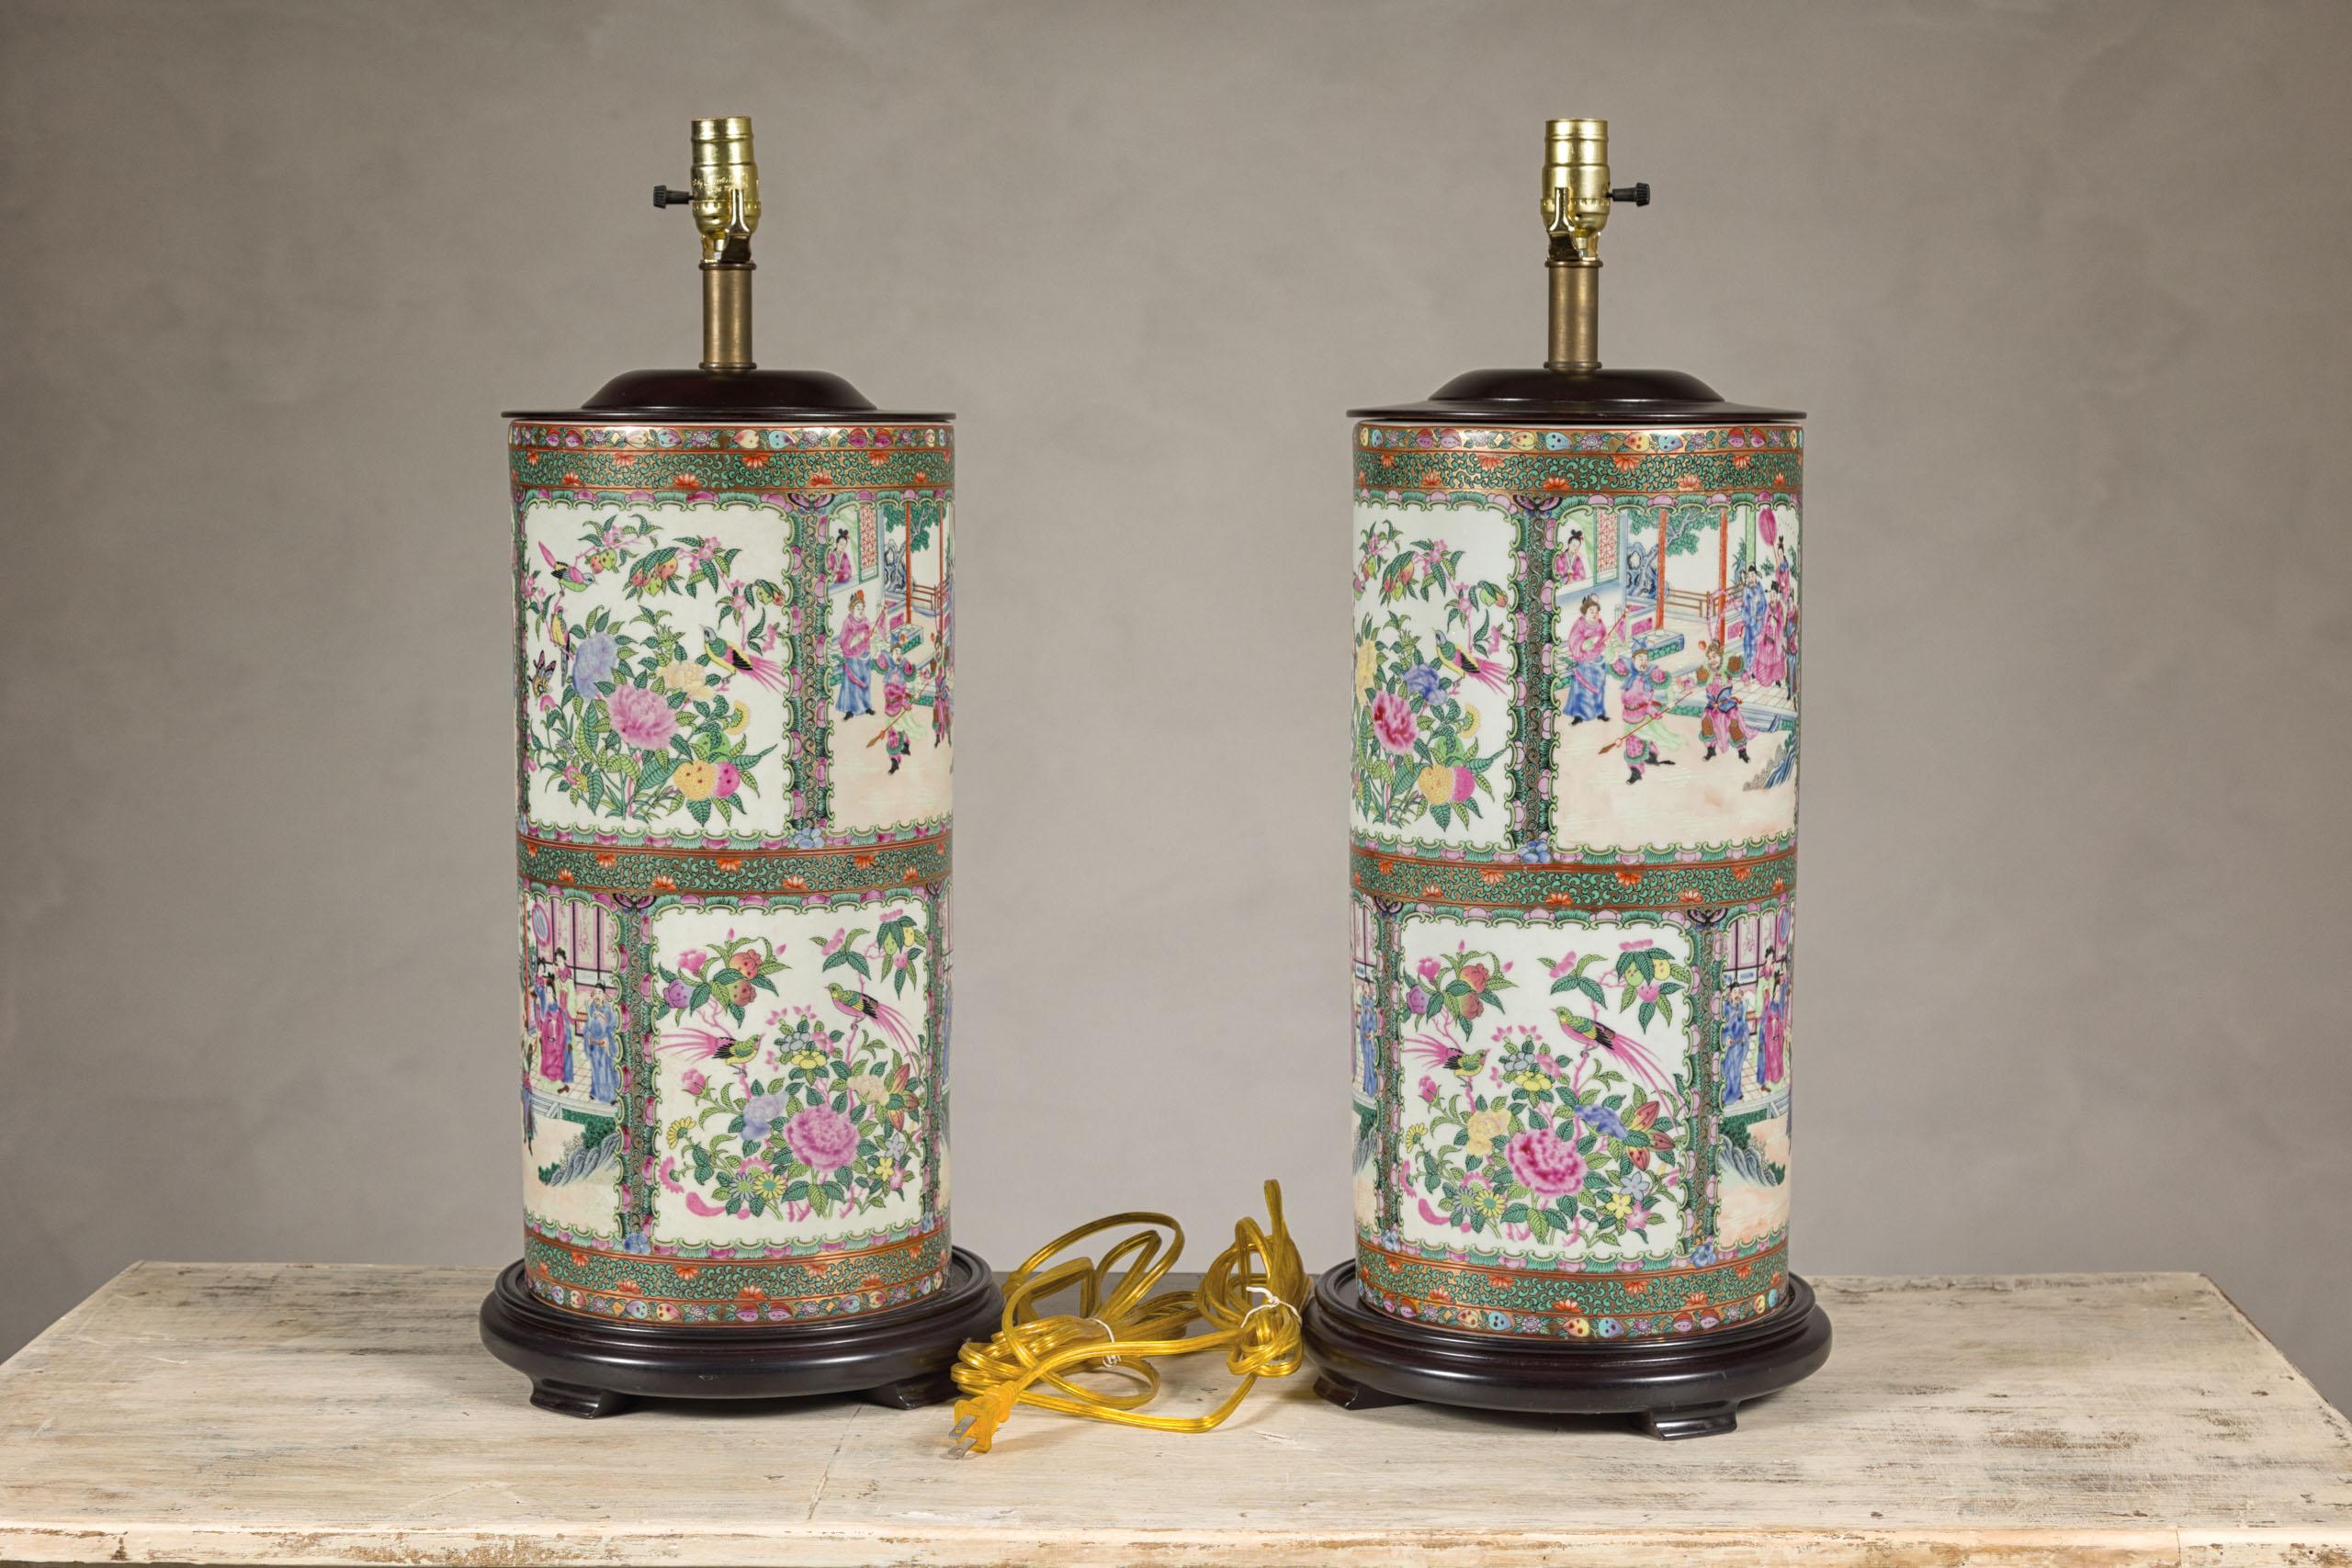 Pair of Hand-Painted Rose Medallion Table Lamps with Court Scenes and Birds For Sale 4